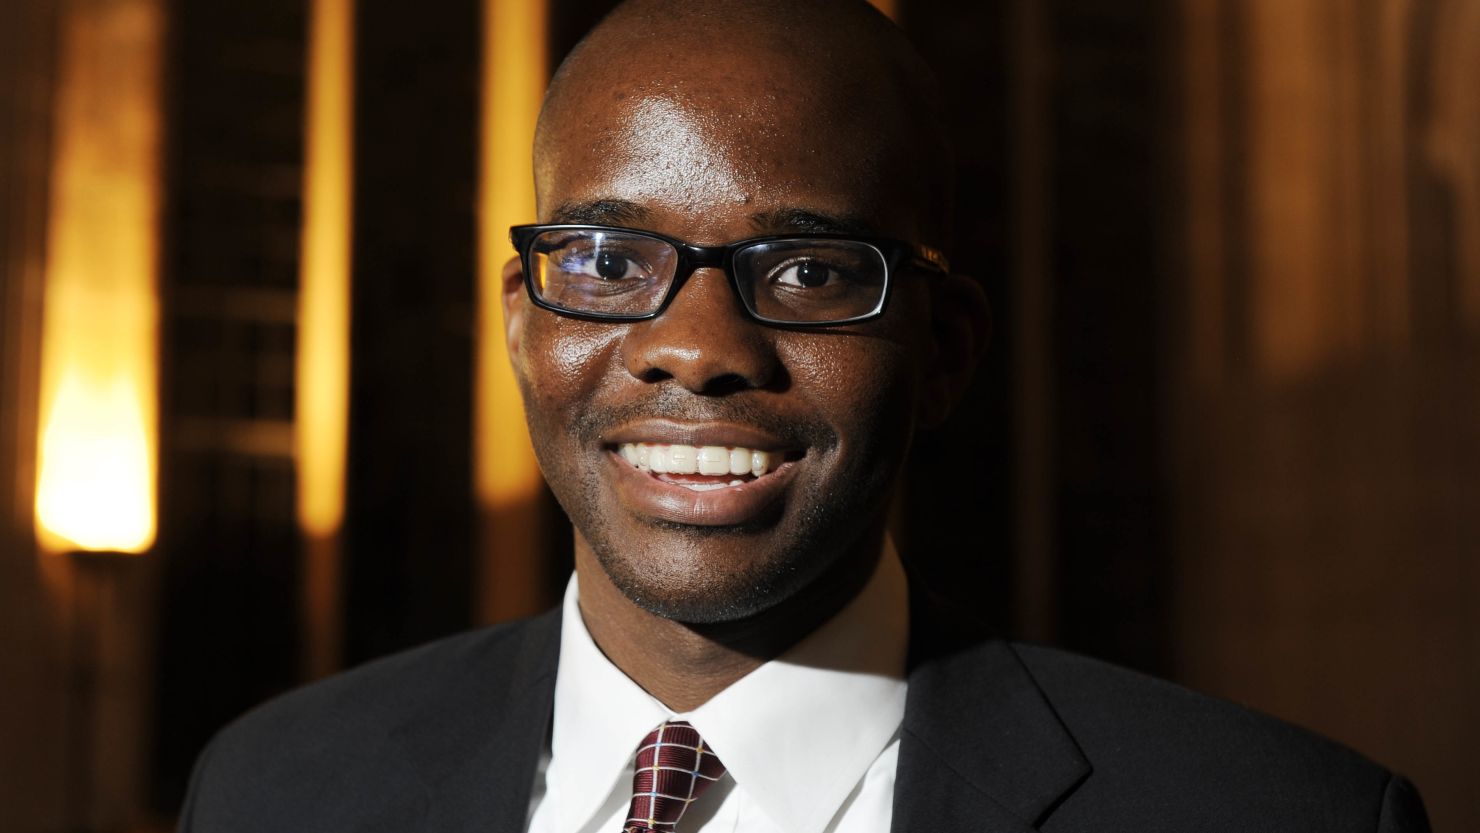 Nigeria's Tope Folarin, winner of the 2013 Caine Prize.